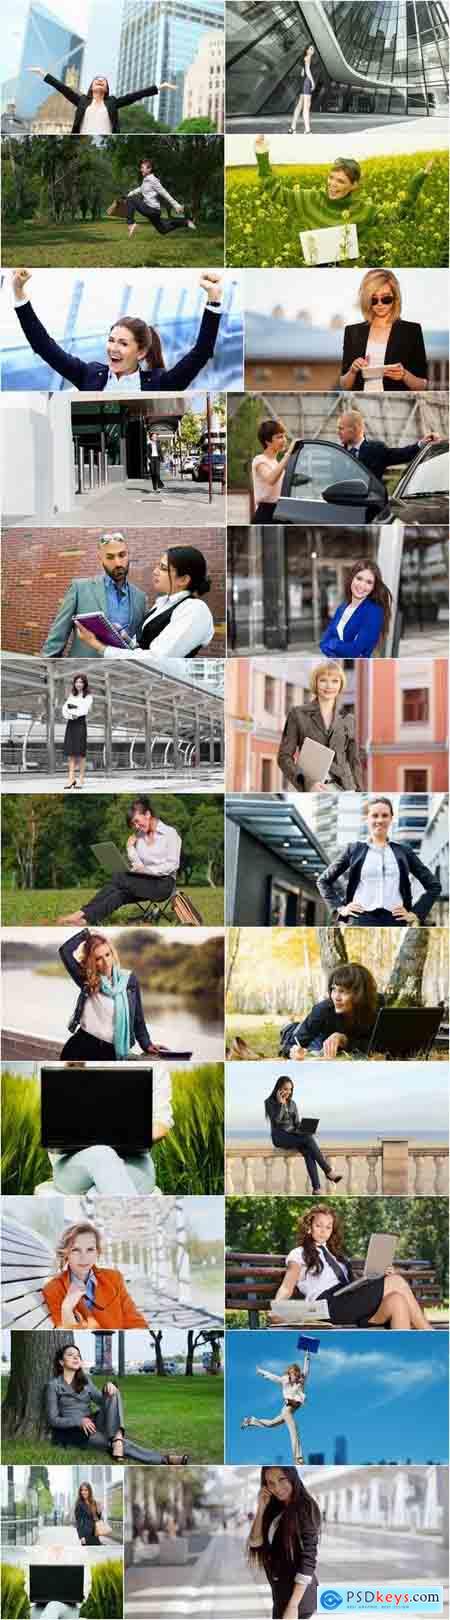 Business ladies girl woman on the nature of the field relaxation holiday 25 HQ Jpeg